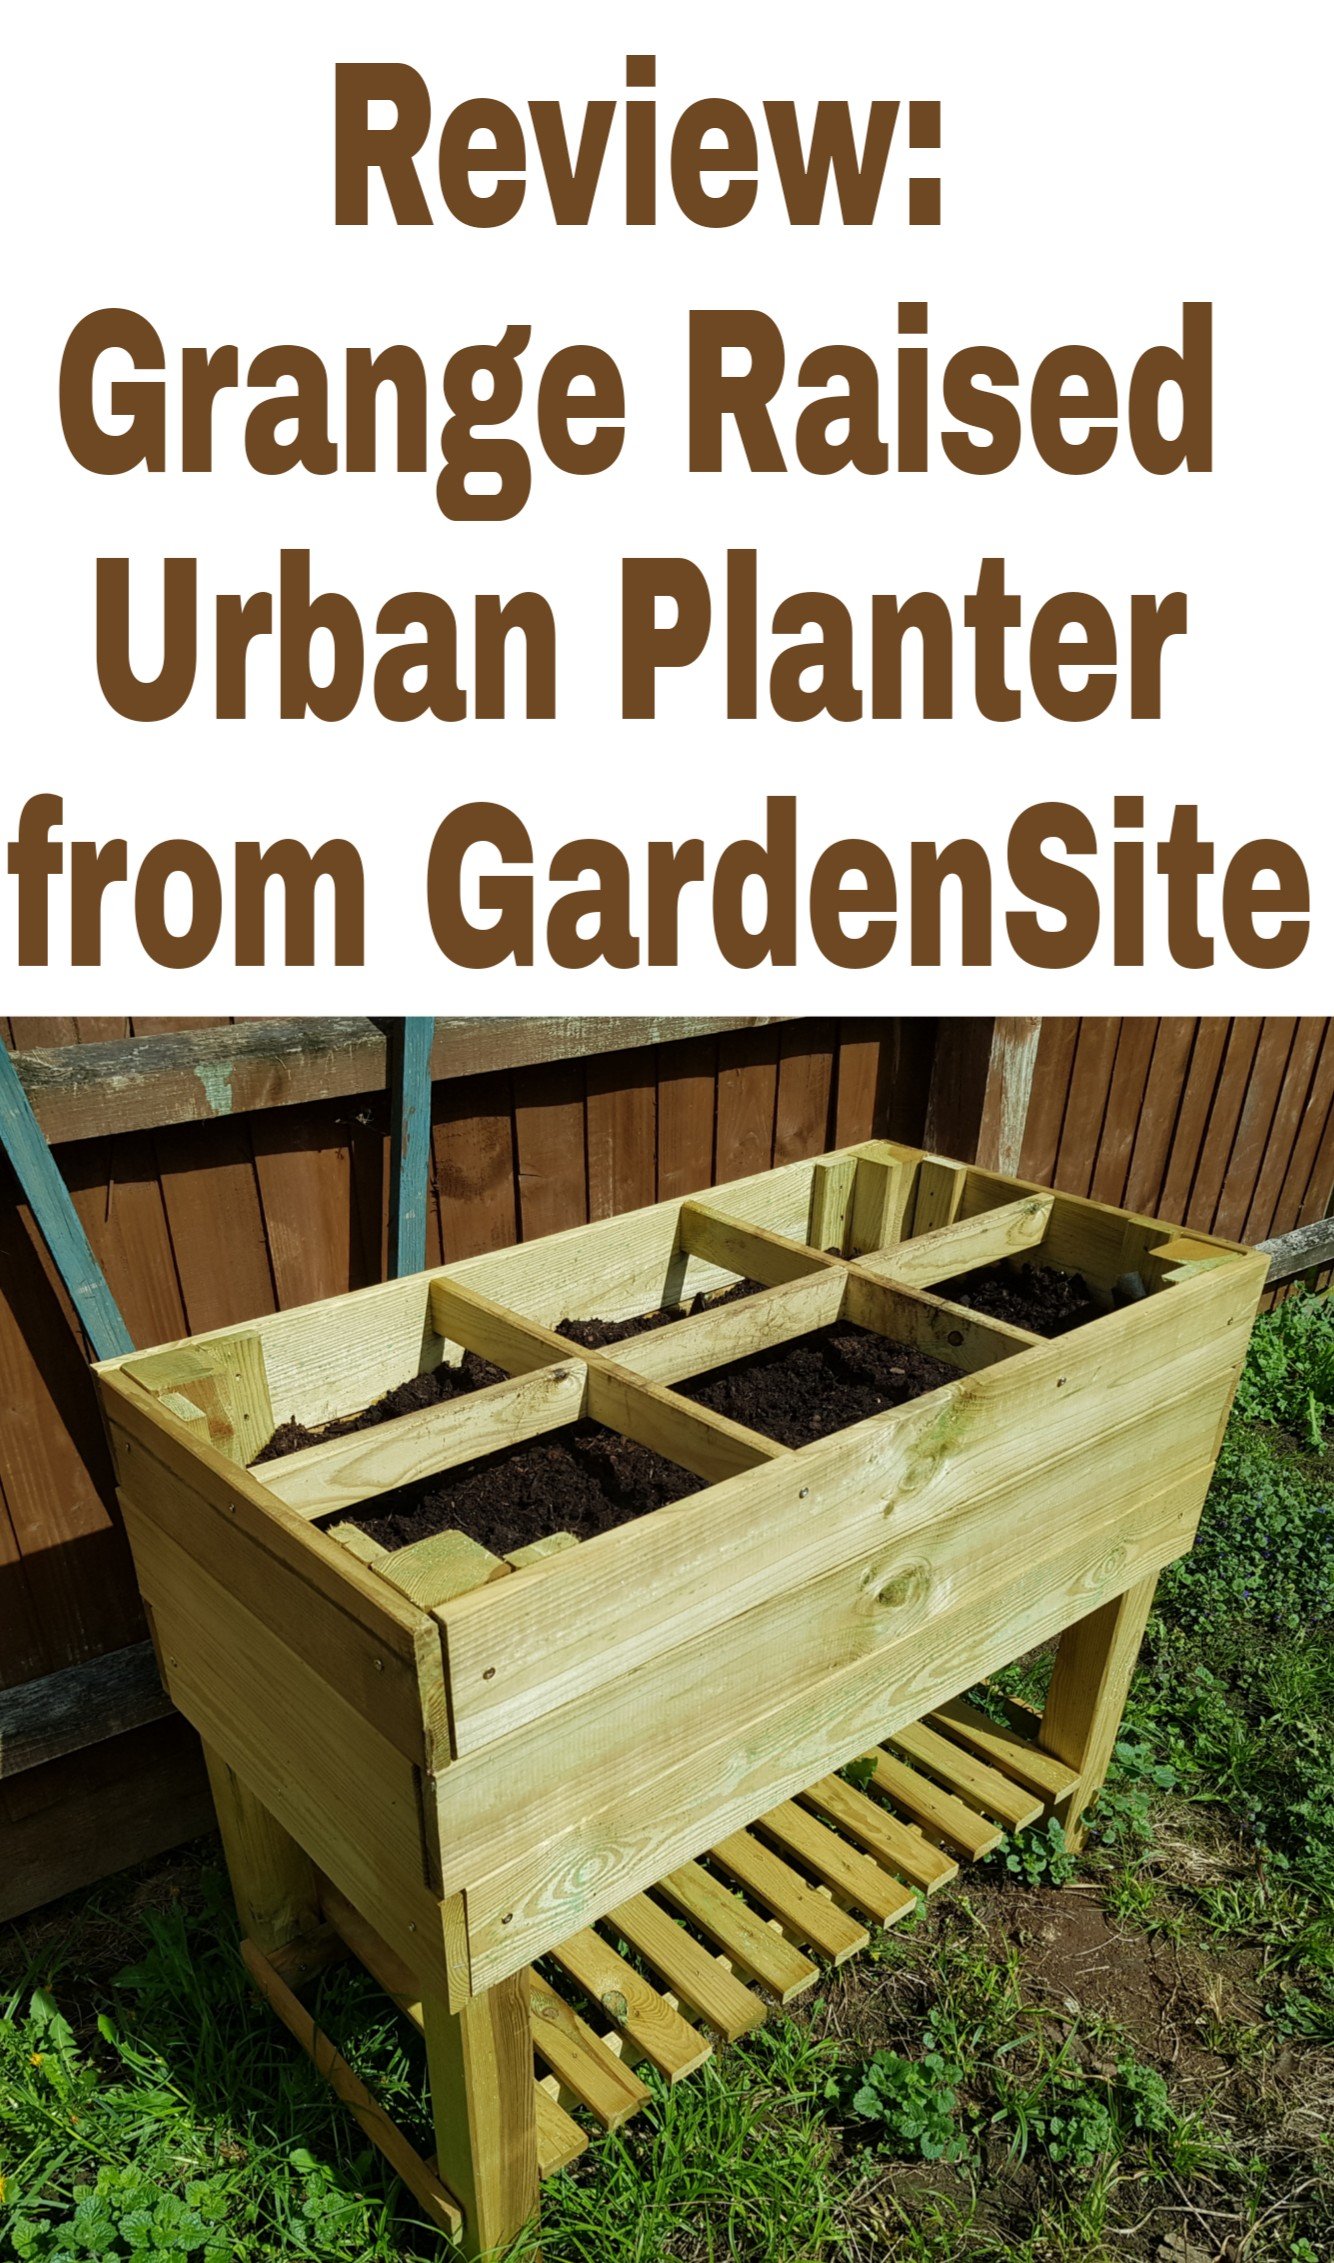 Grange Raised Urban Planter from Gardensite title with image of planter